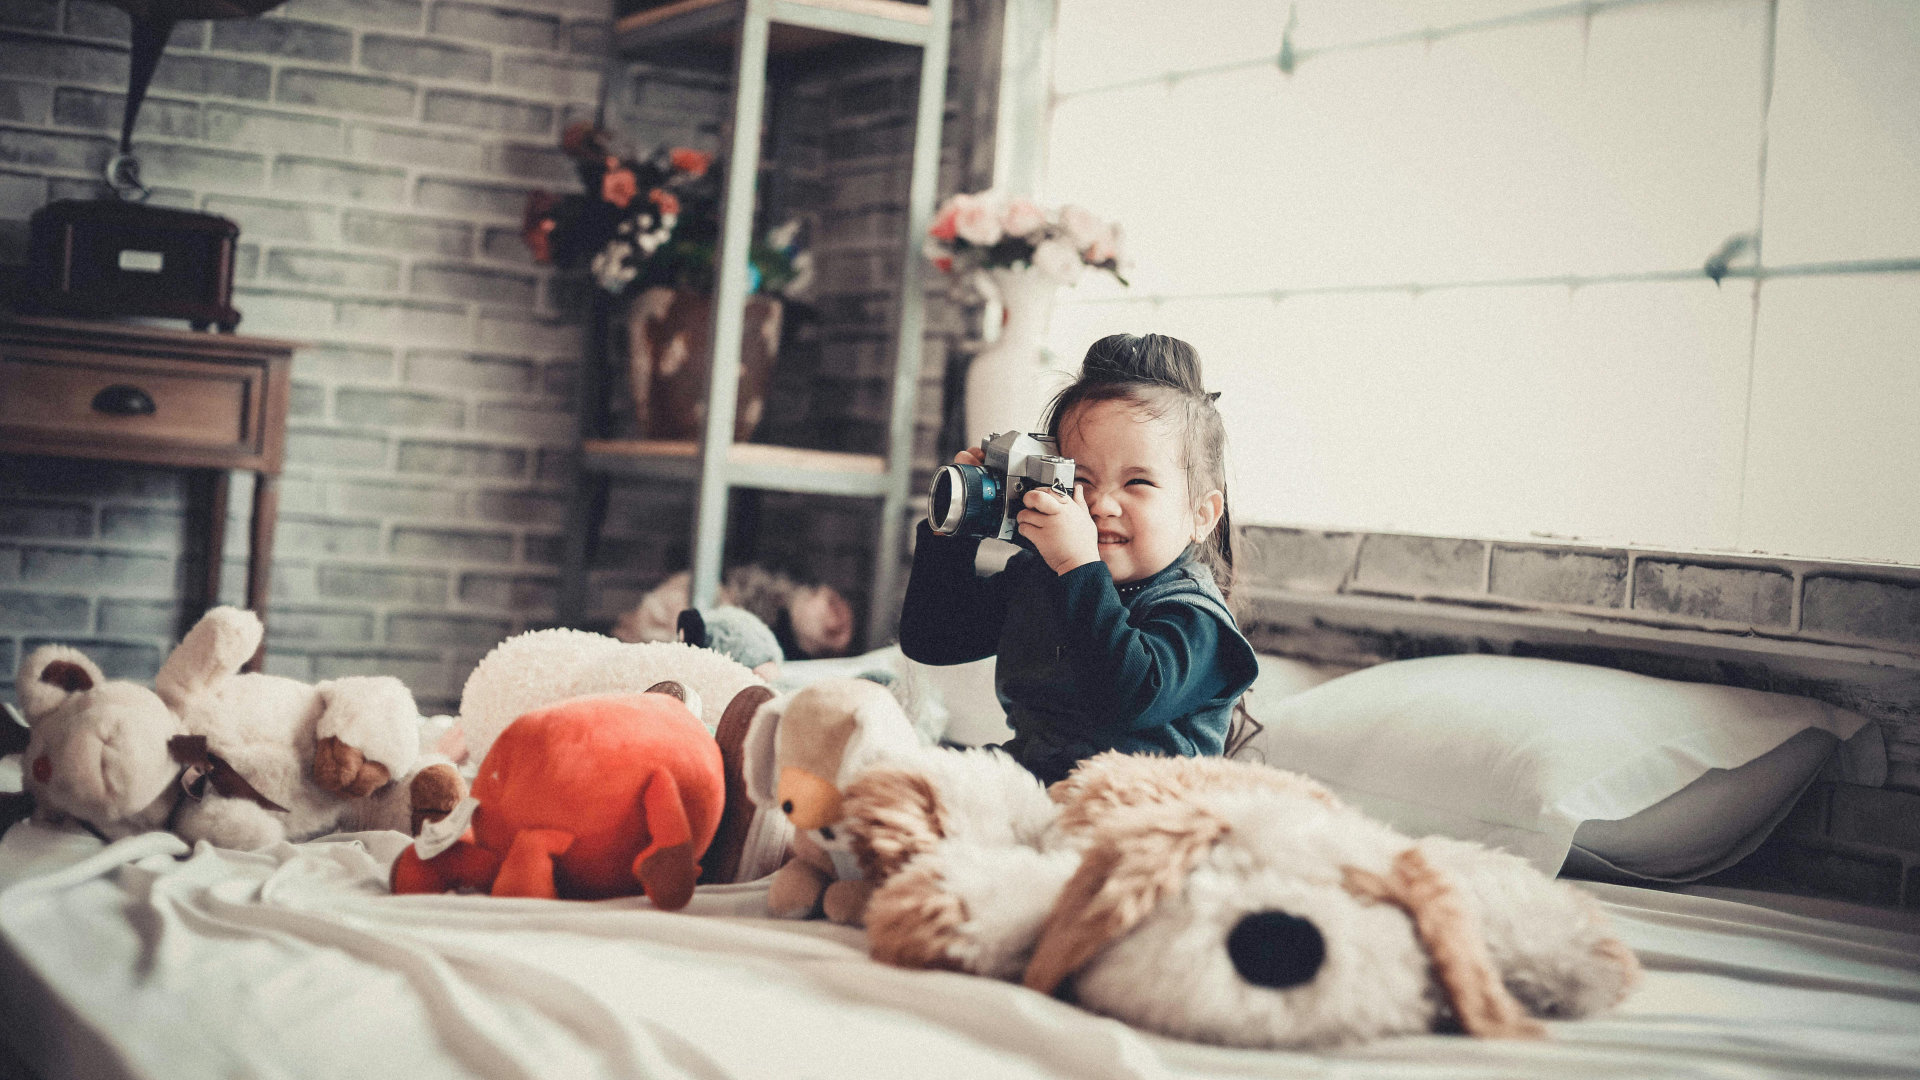 Child sits on bed playing with a camera surrounded by stuffed animals